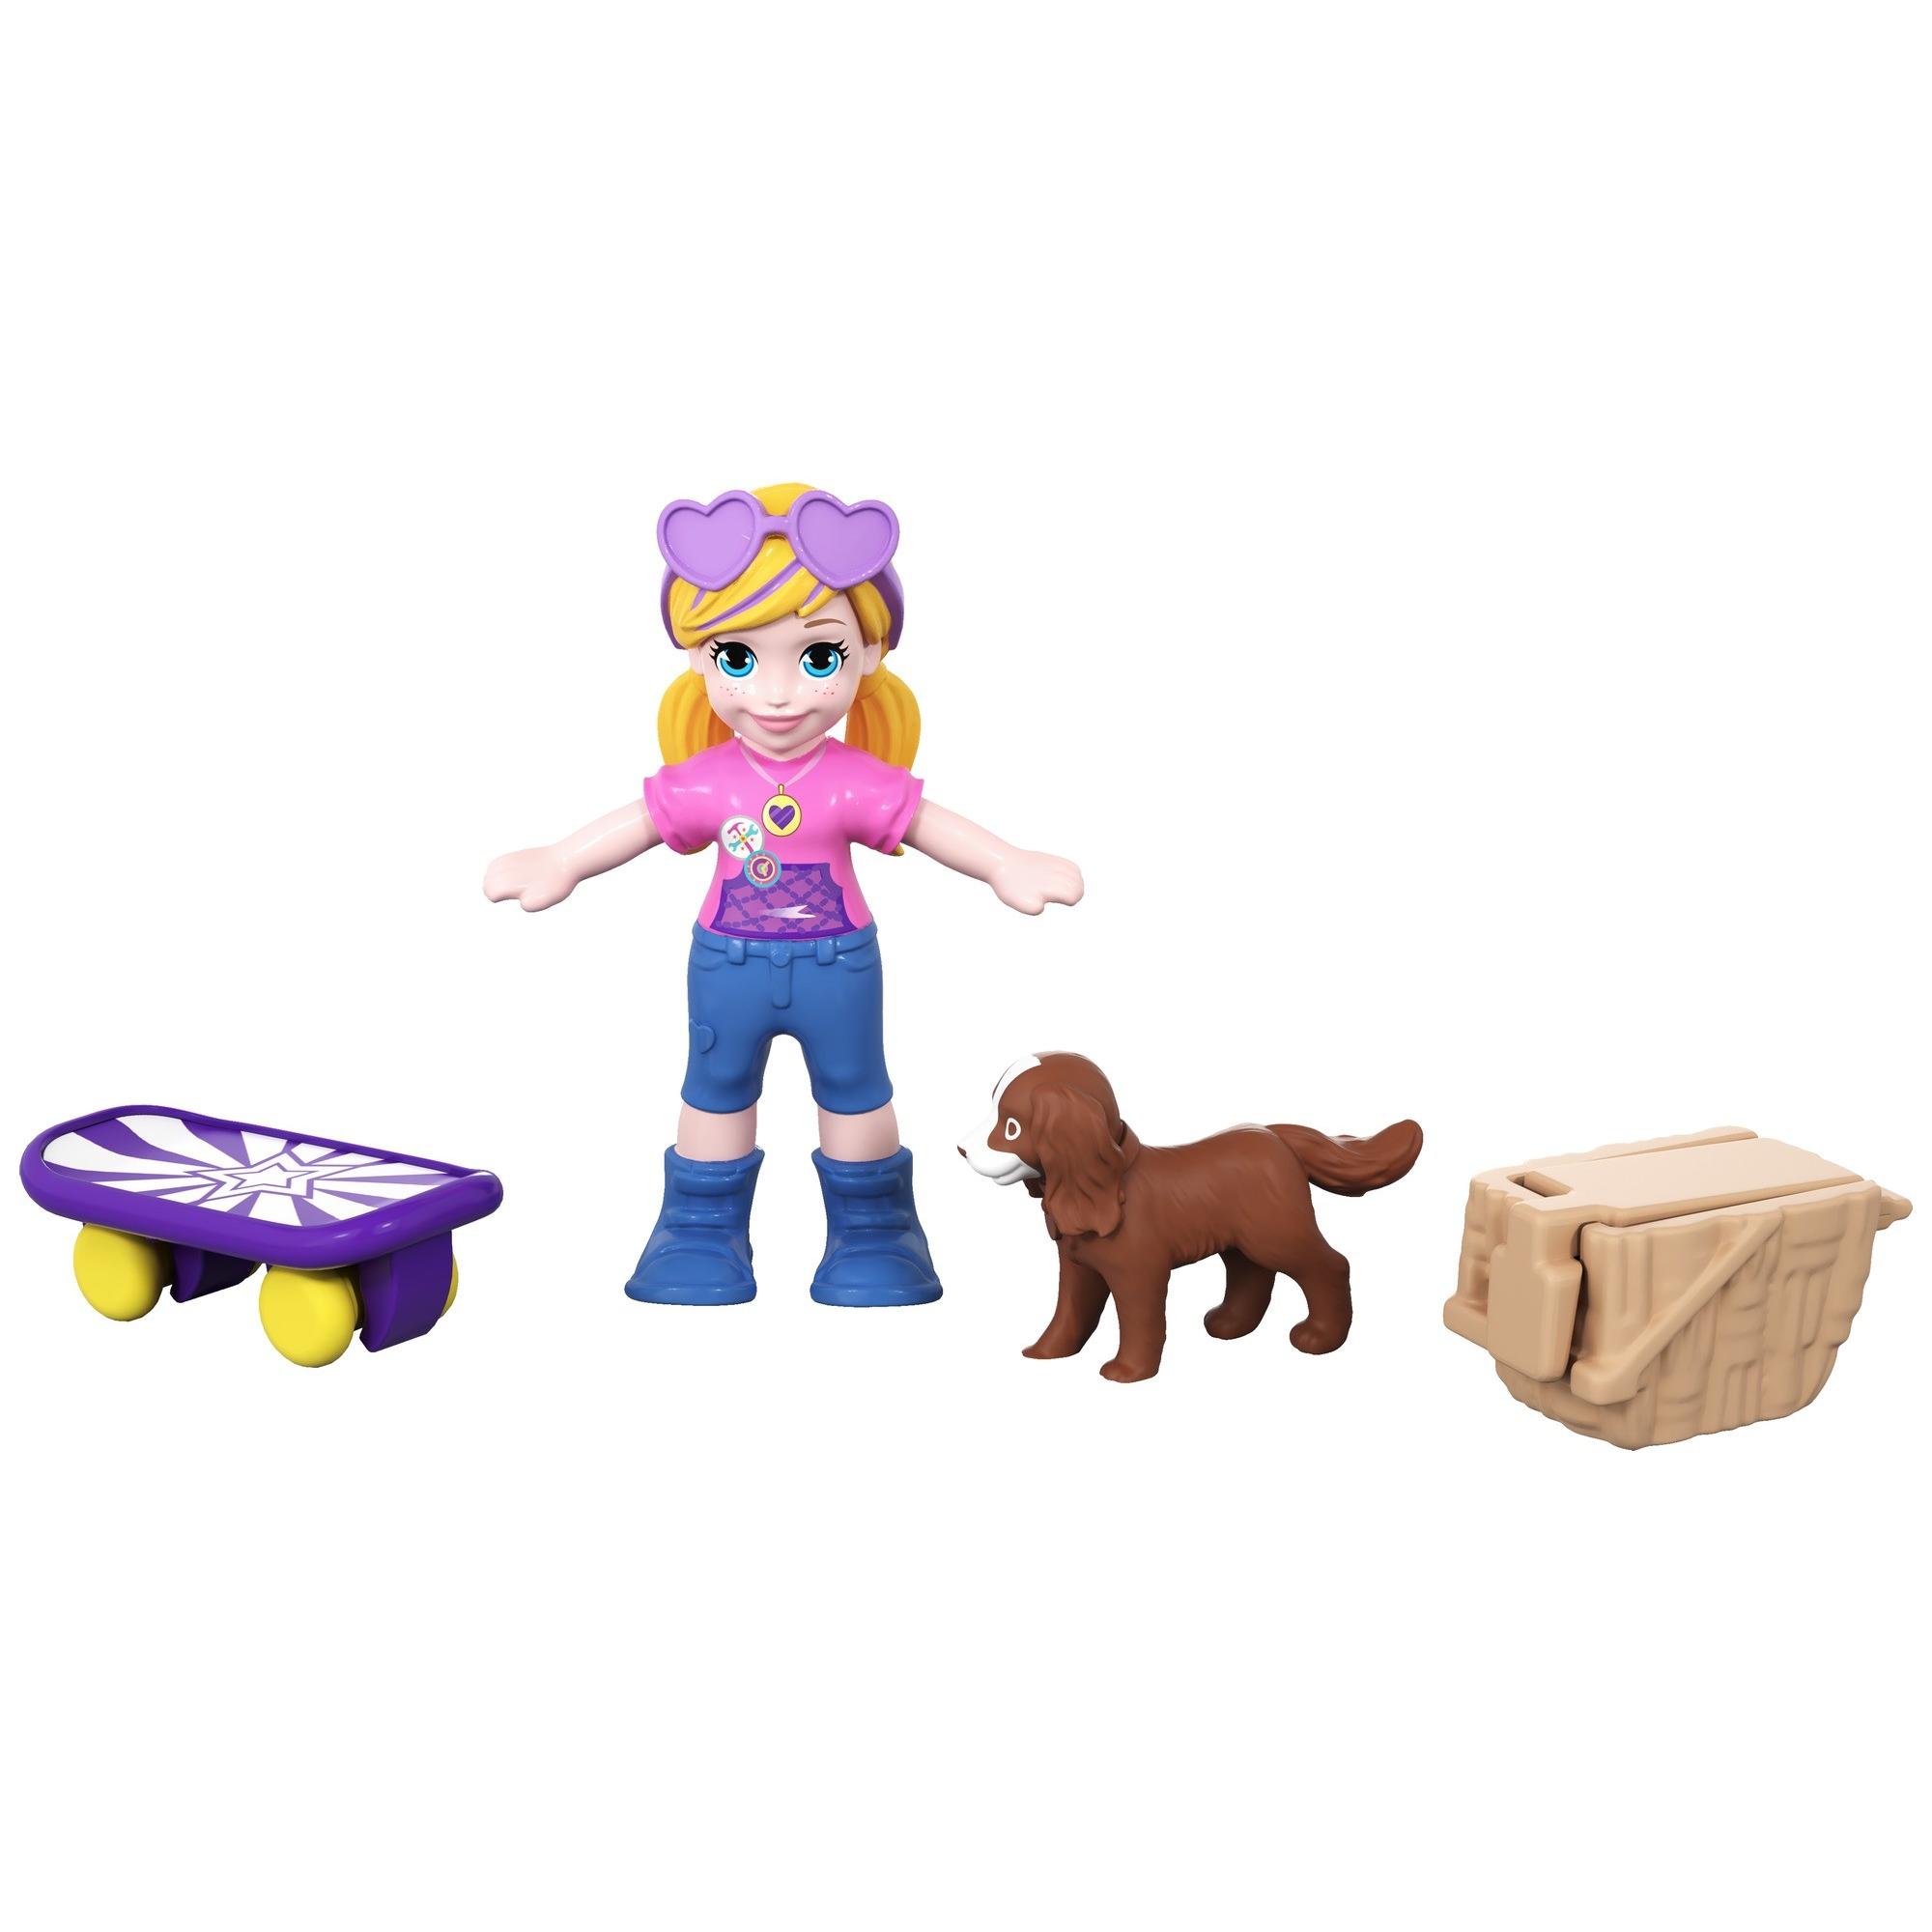 Polly Pocket Tiny Pocket Places Picnic Portable Compact - image 5 of 7